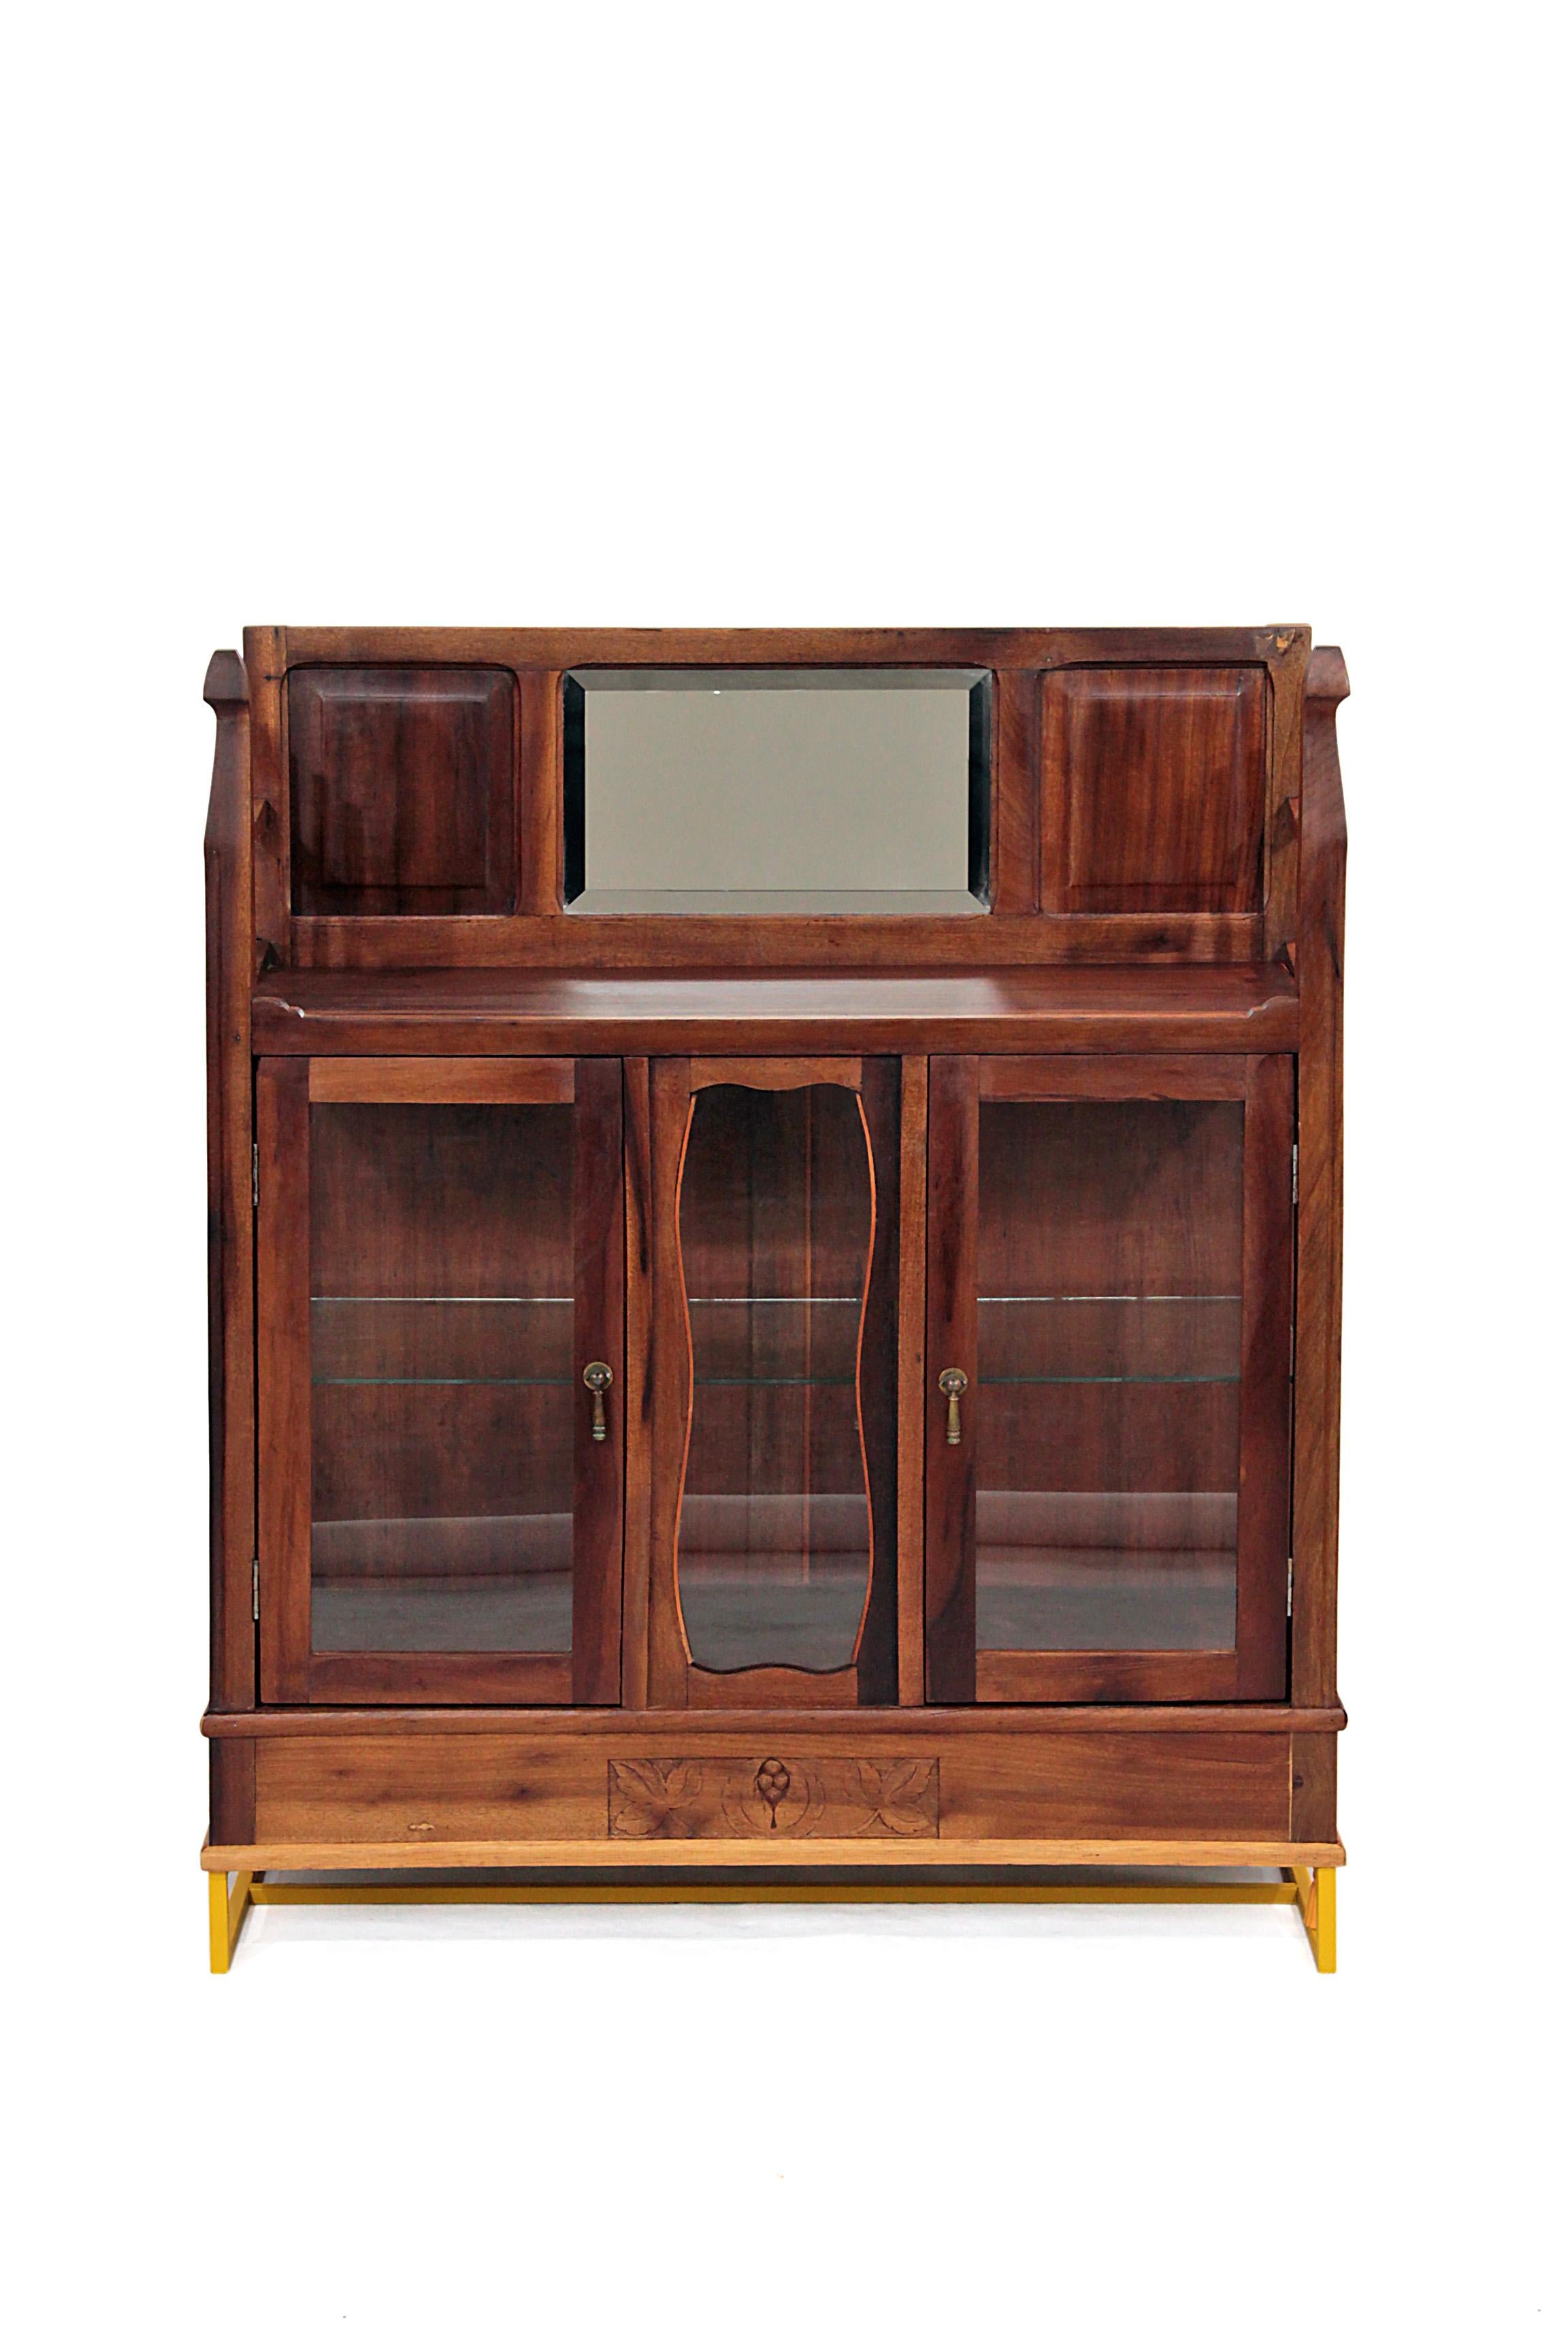 The glass cabinet - Restauro #1 (Restoration #1) is an antique Brazilian walnut cabinet restored with glass panels and shelf, antique looking brass handles and bright yellow steel base, in which are two 3D printed small statues. Since this a design